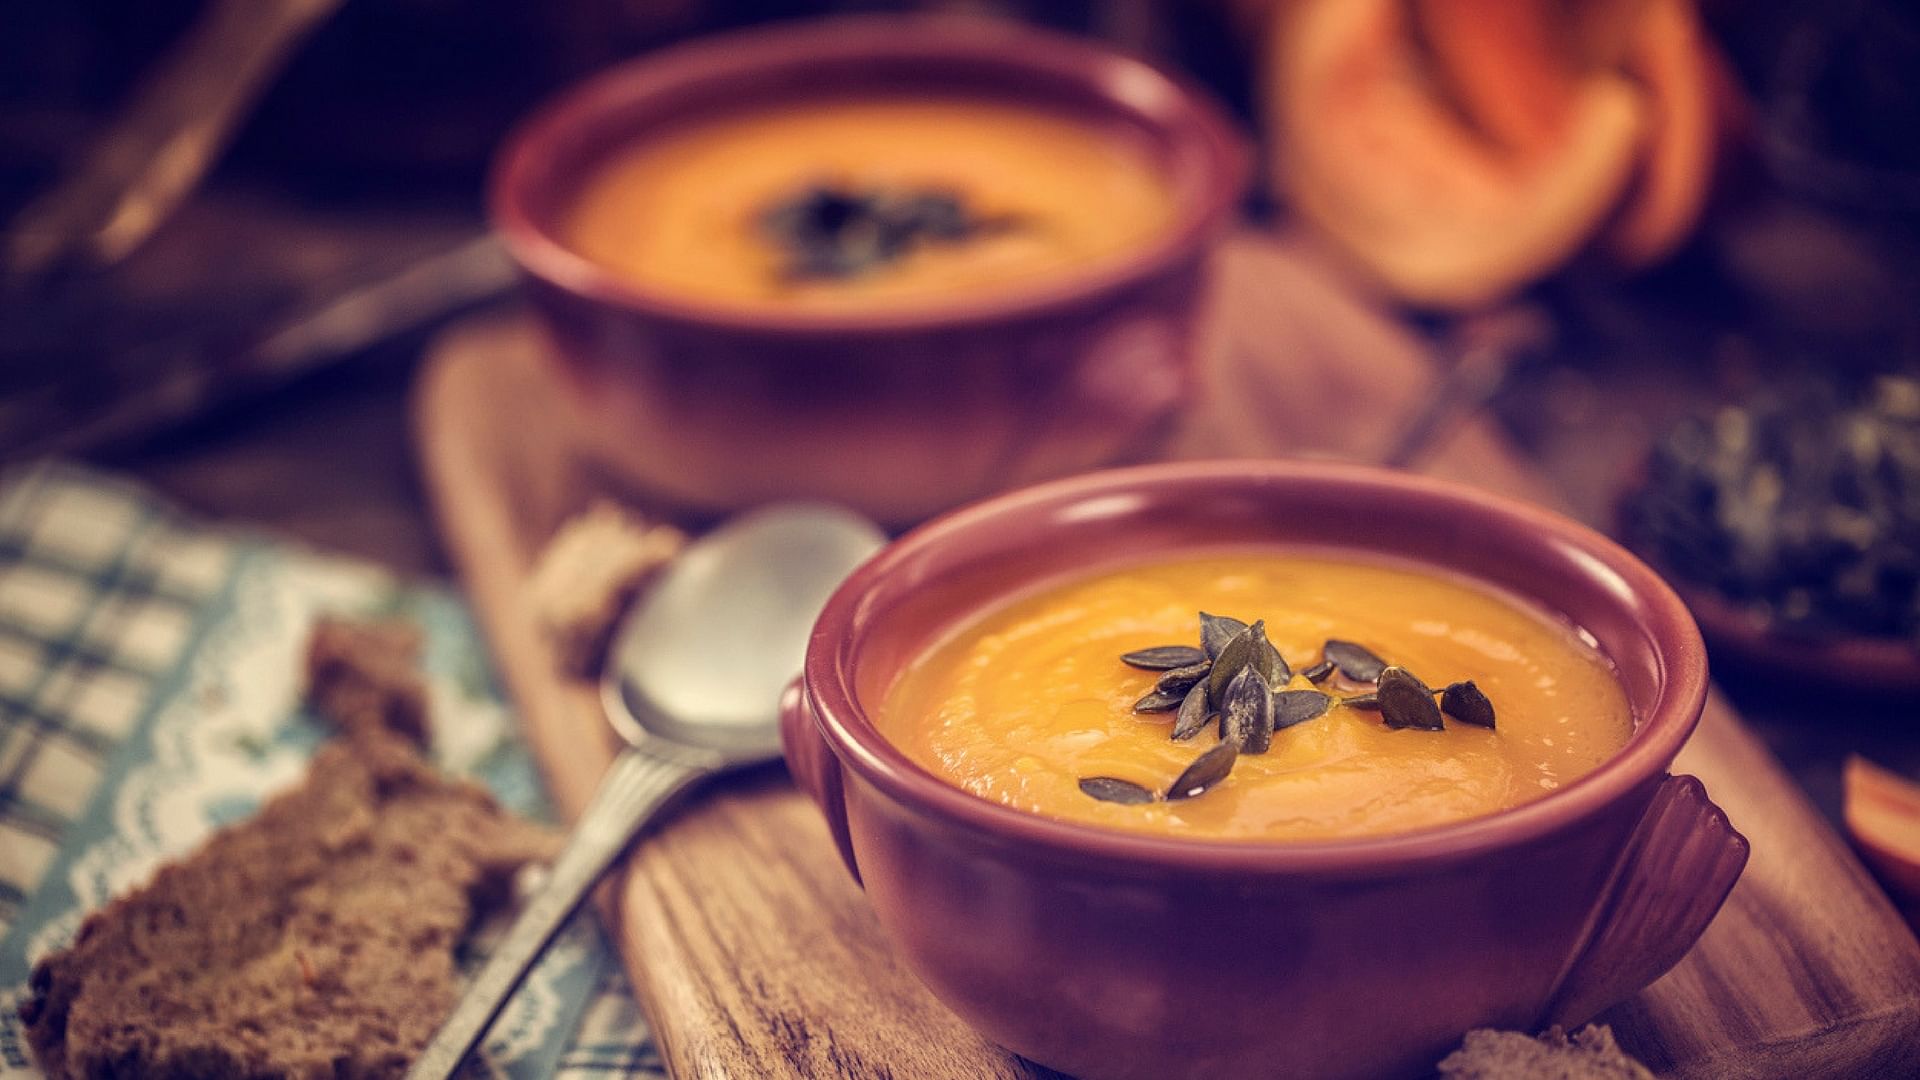 Winter time is soup time – nothing comforts more than a hot bowl of soup. (Photo: iStock)